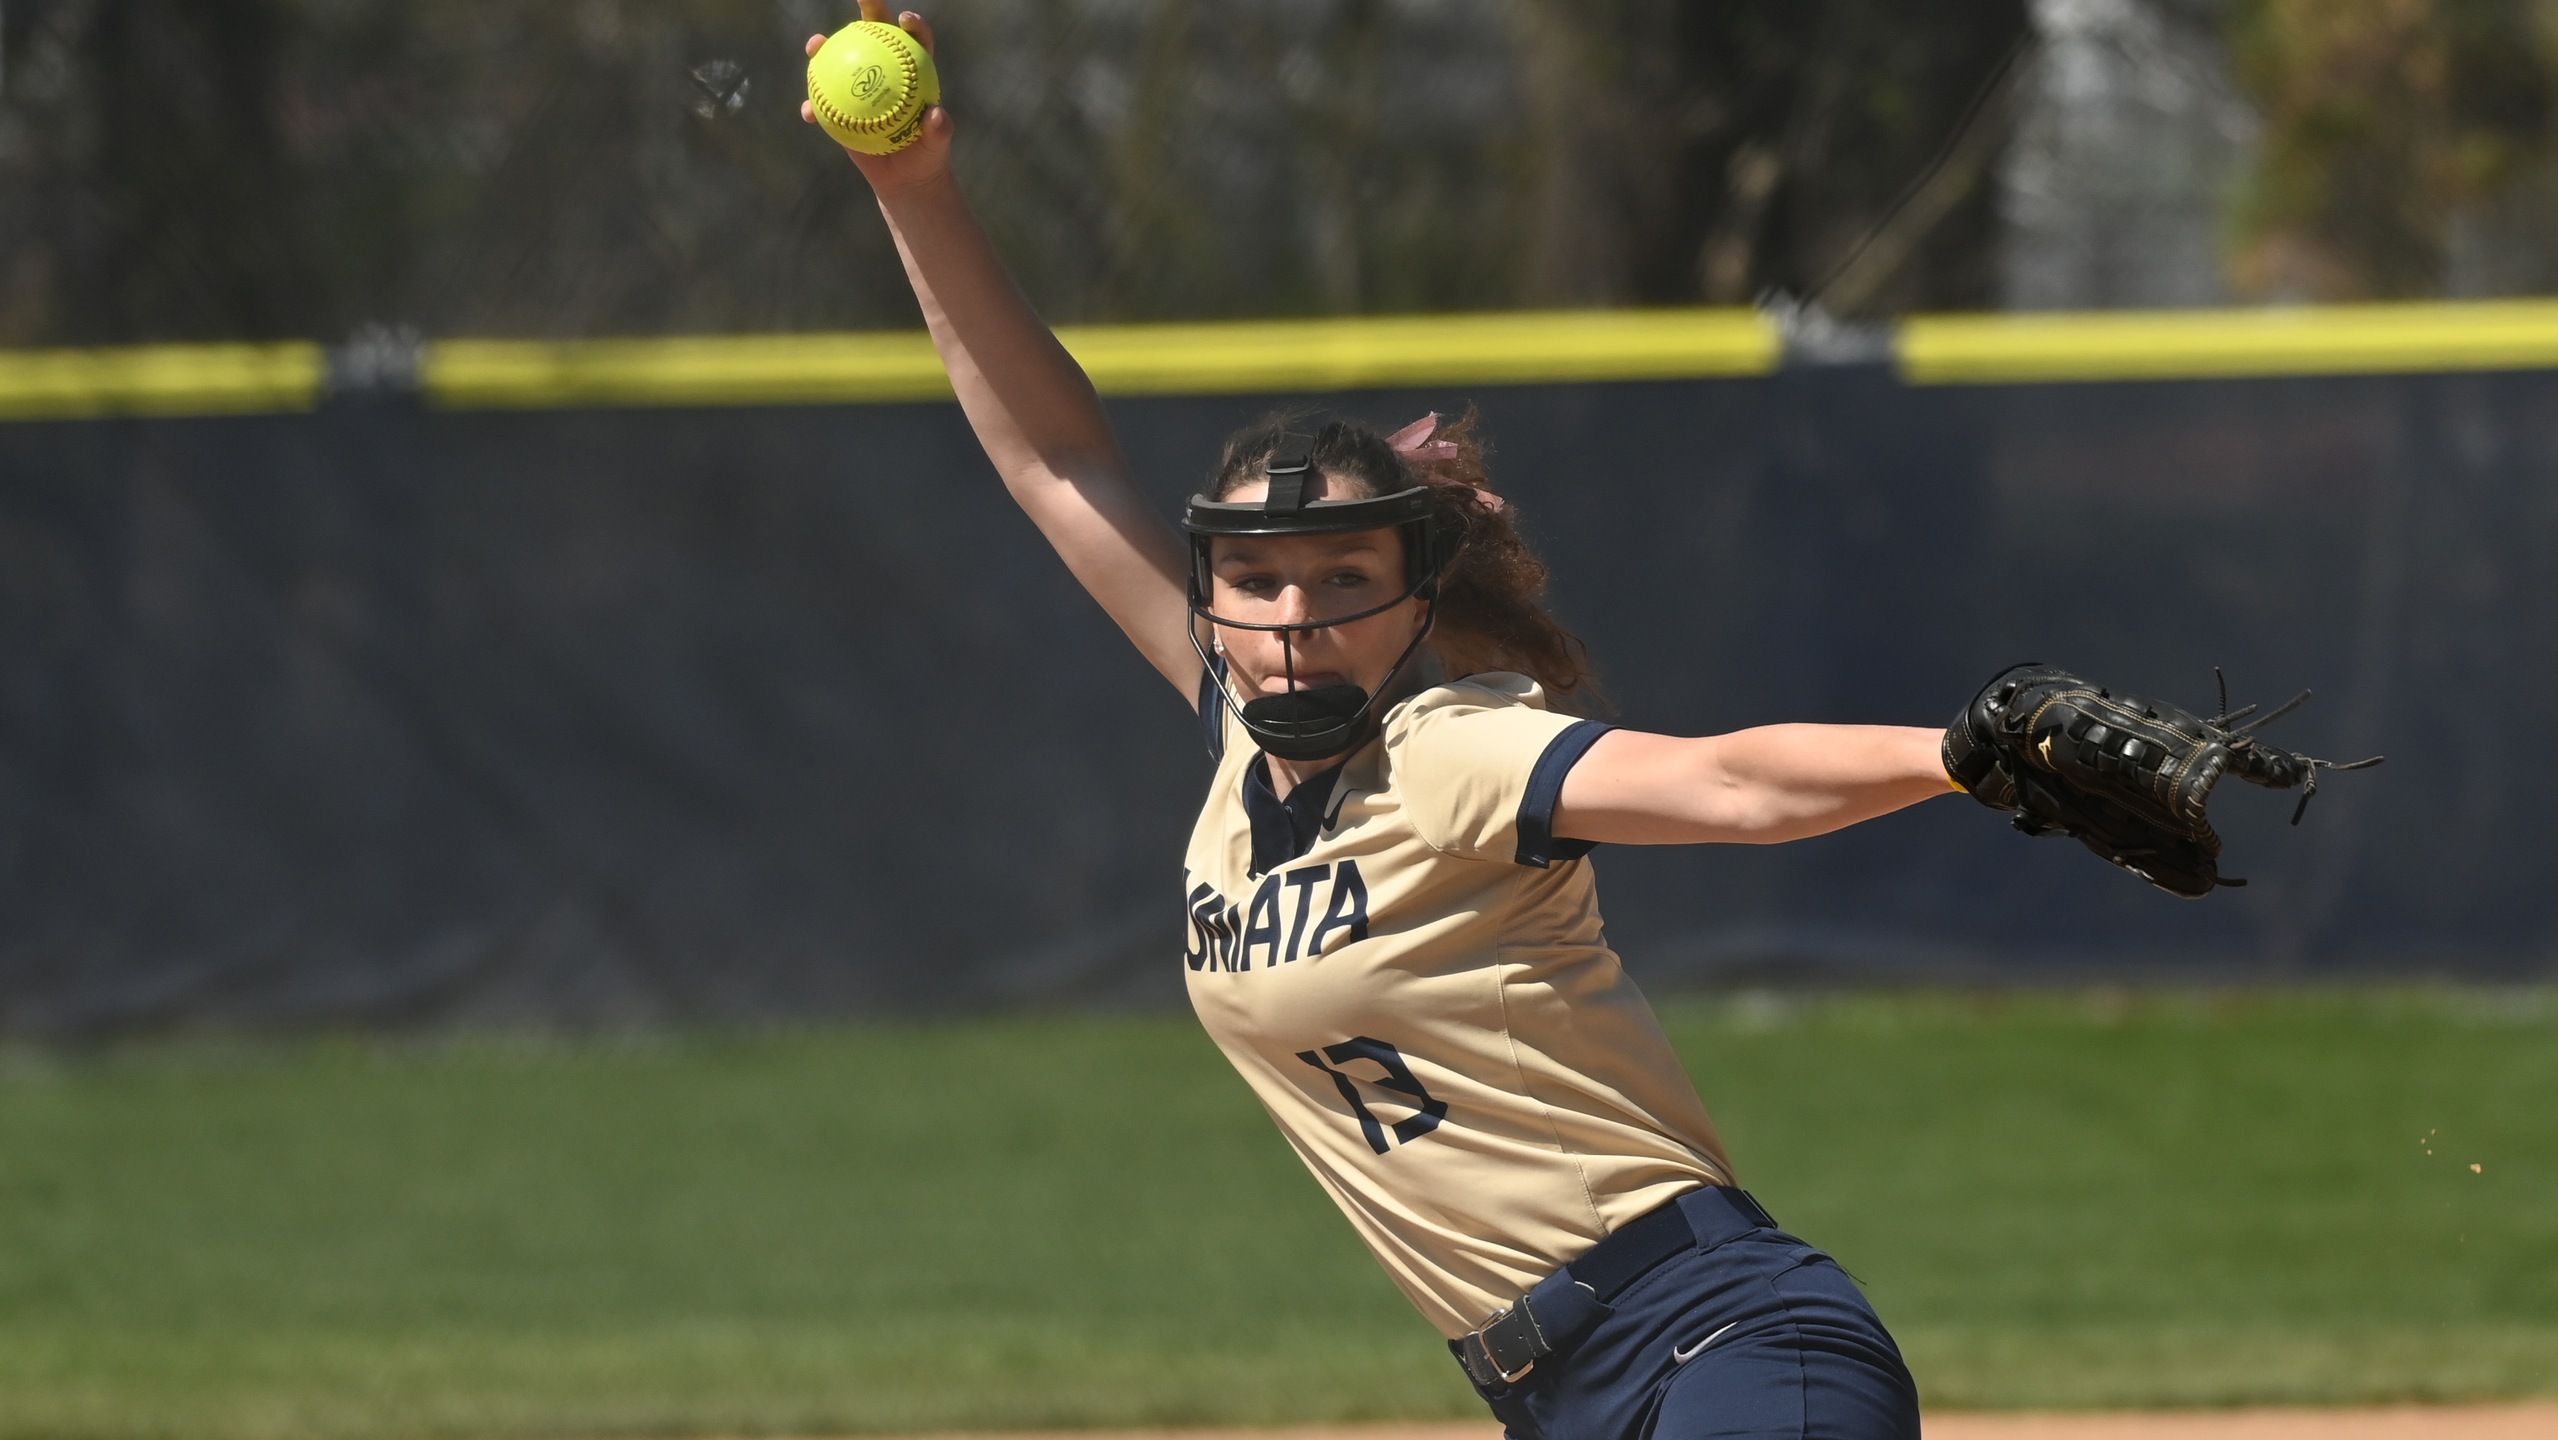 Softball Ends Busy Week With Pair of Thrilling Victories Over Cougars